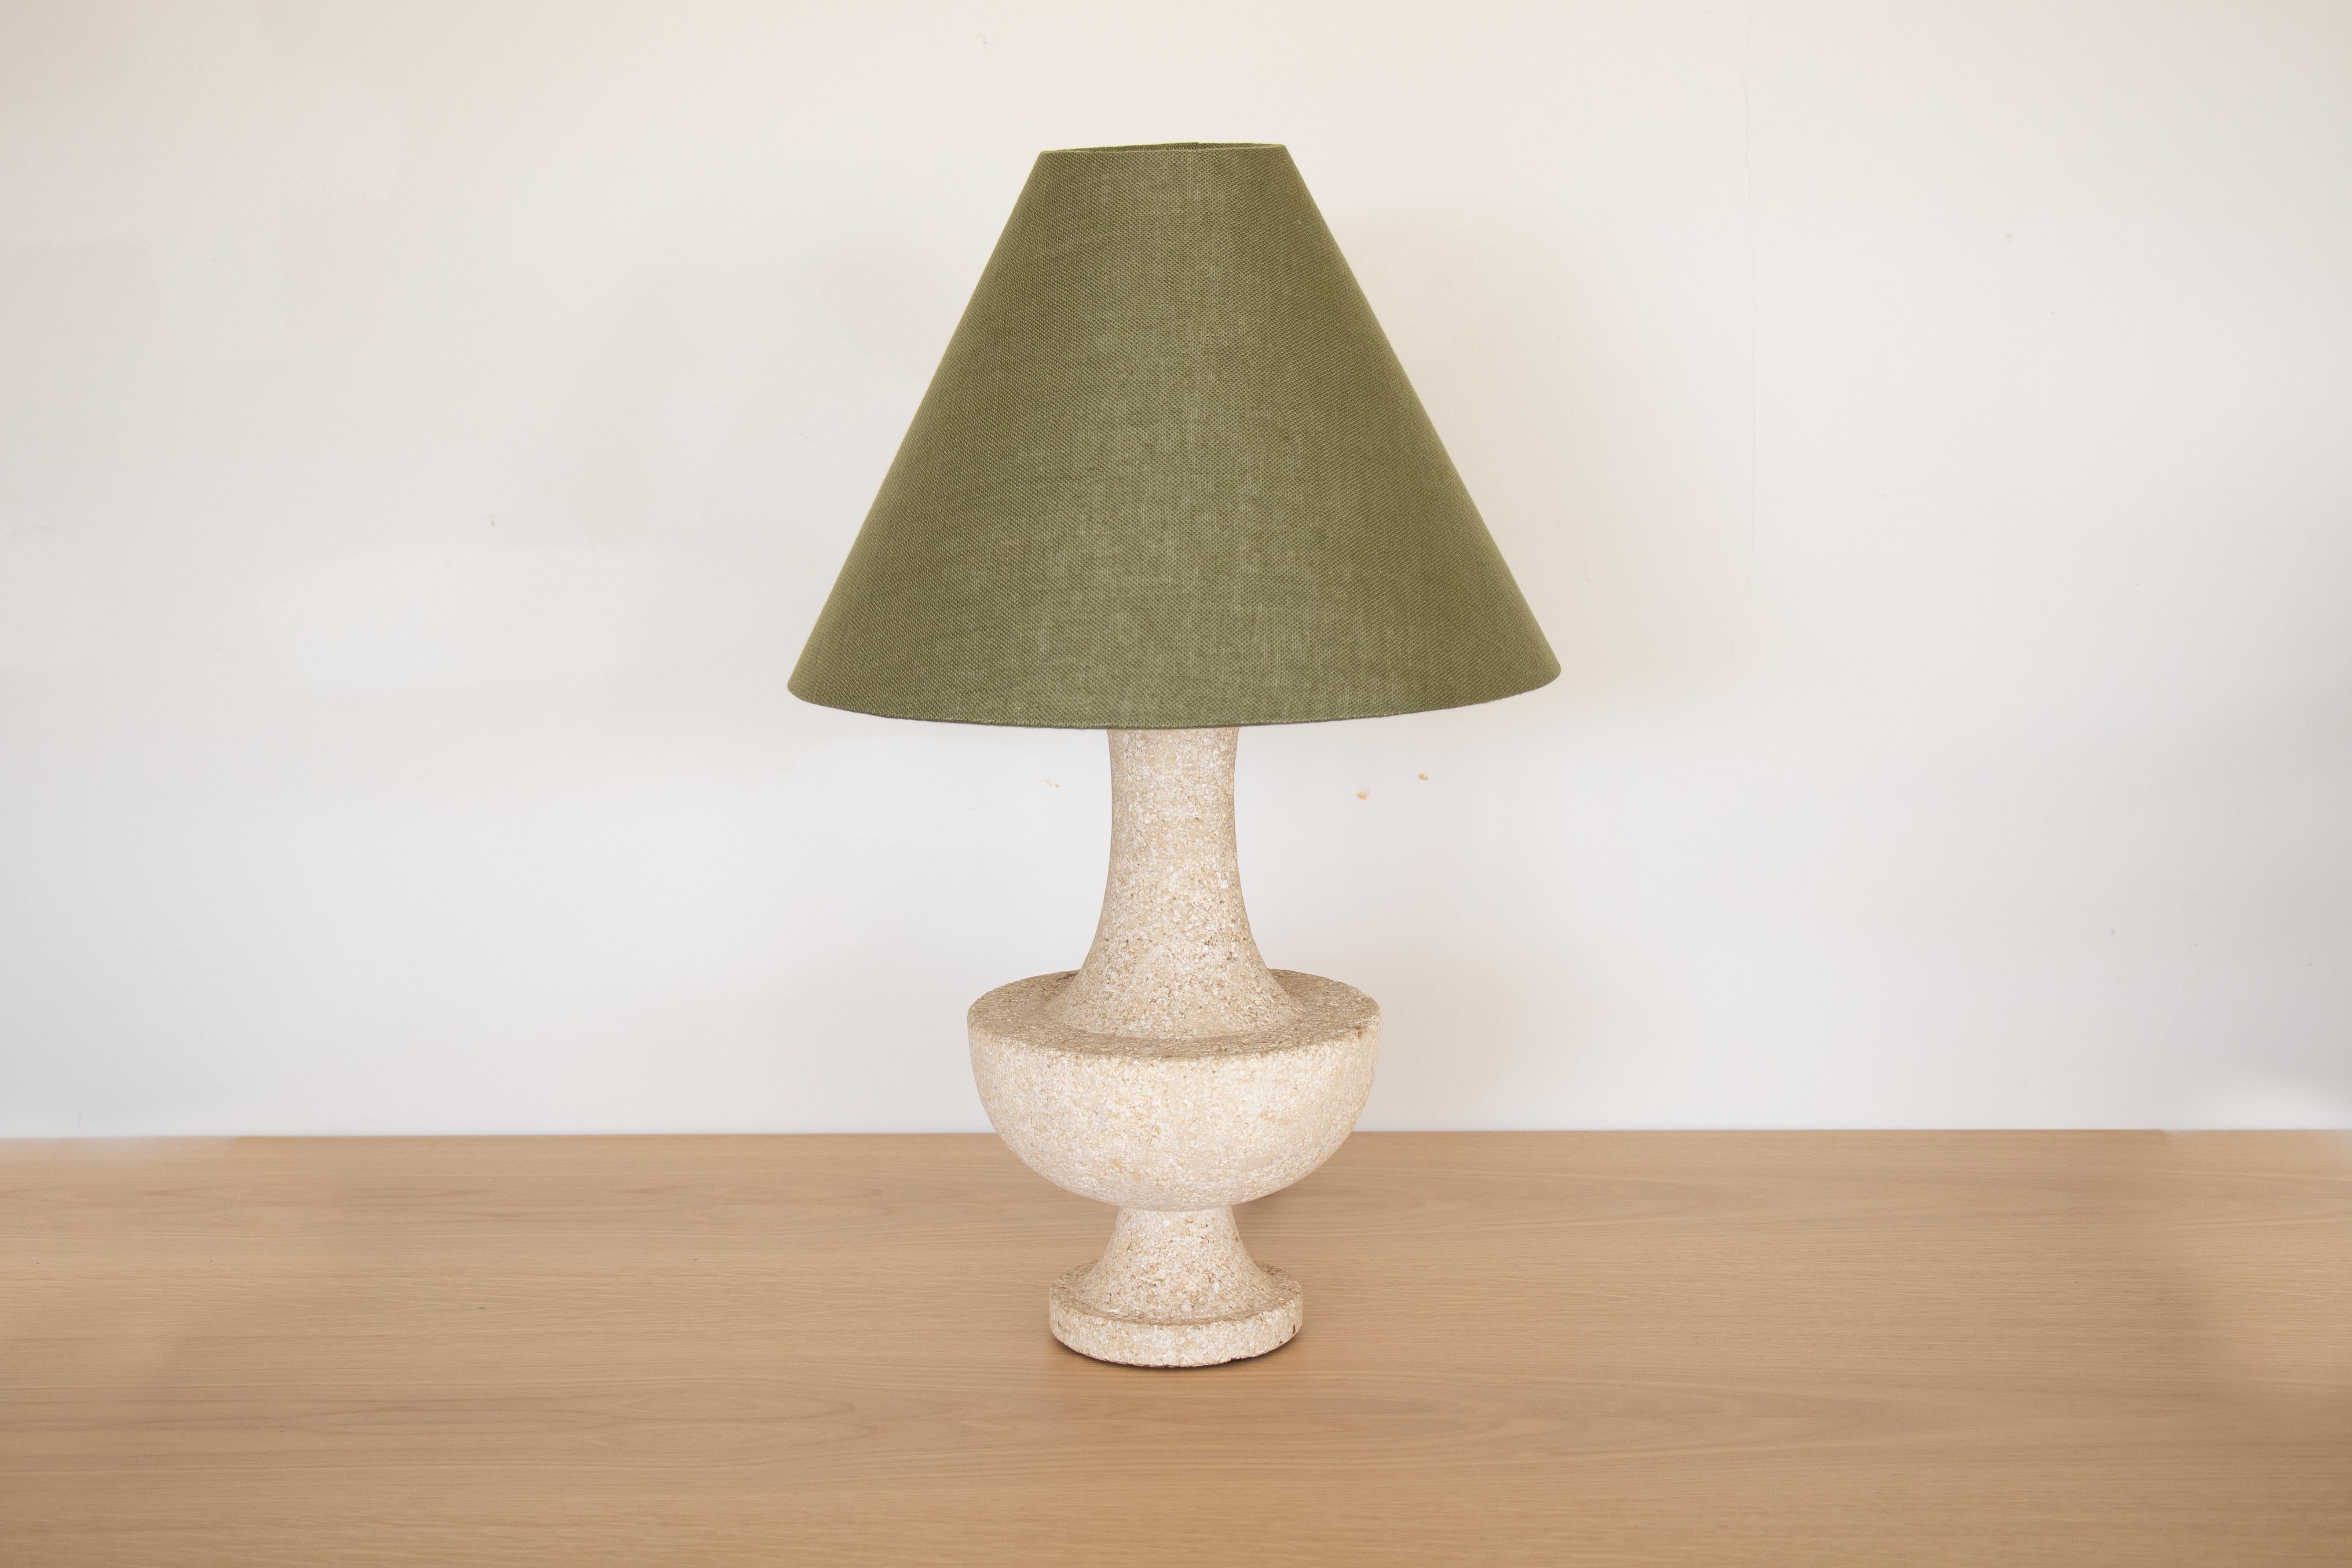 Vintage French white stone table lamp with new green linen shade. Newly re-wired. 

Measures: Base diameter 8